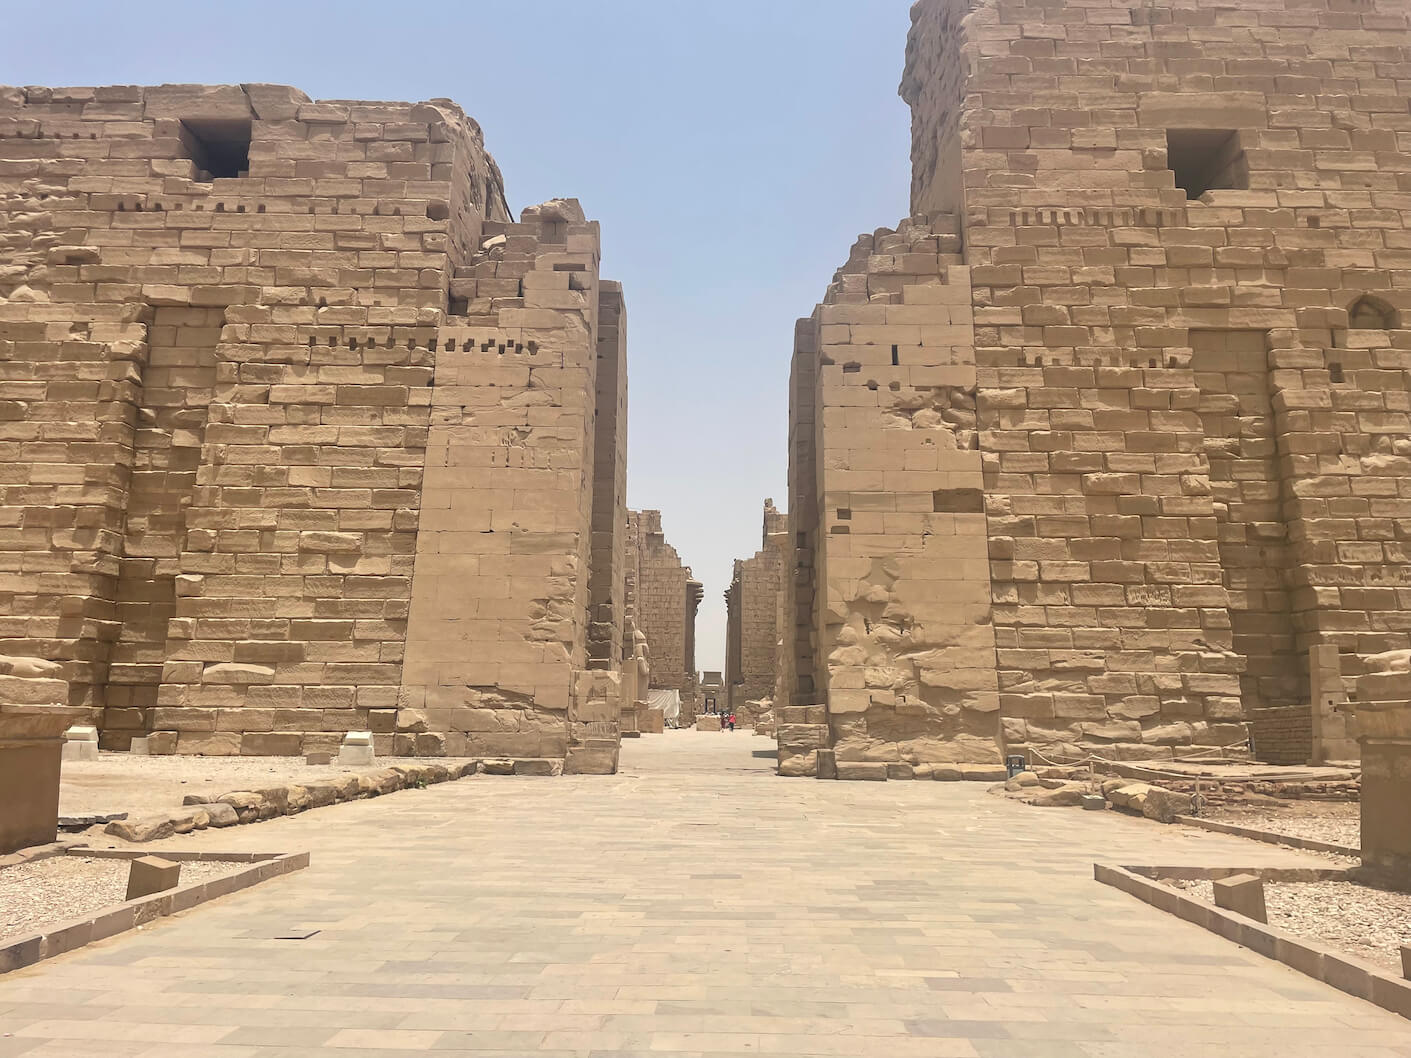 The impressive entrance to the Temple of Karnak